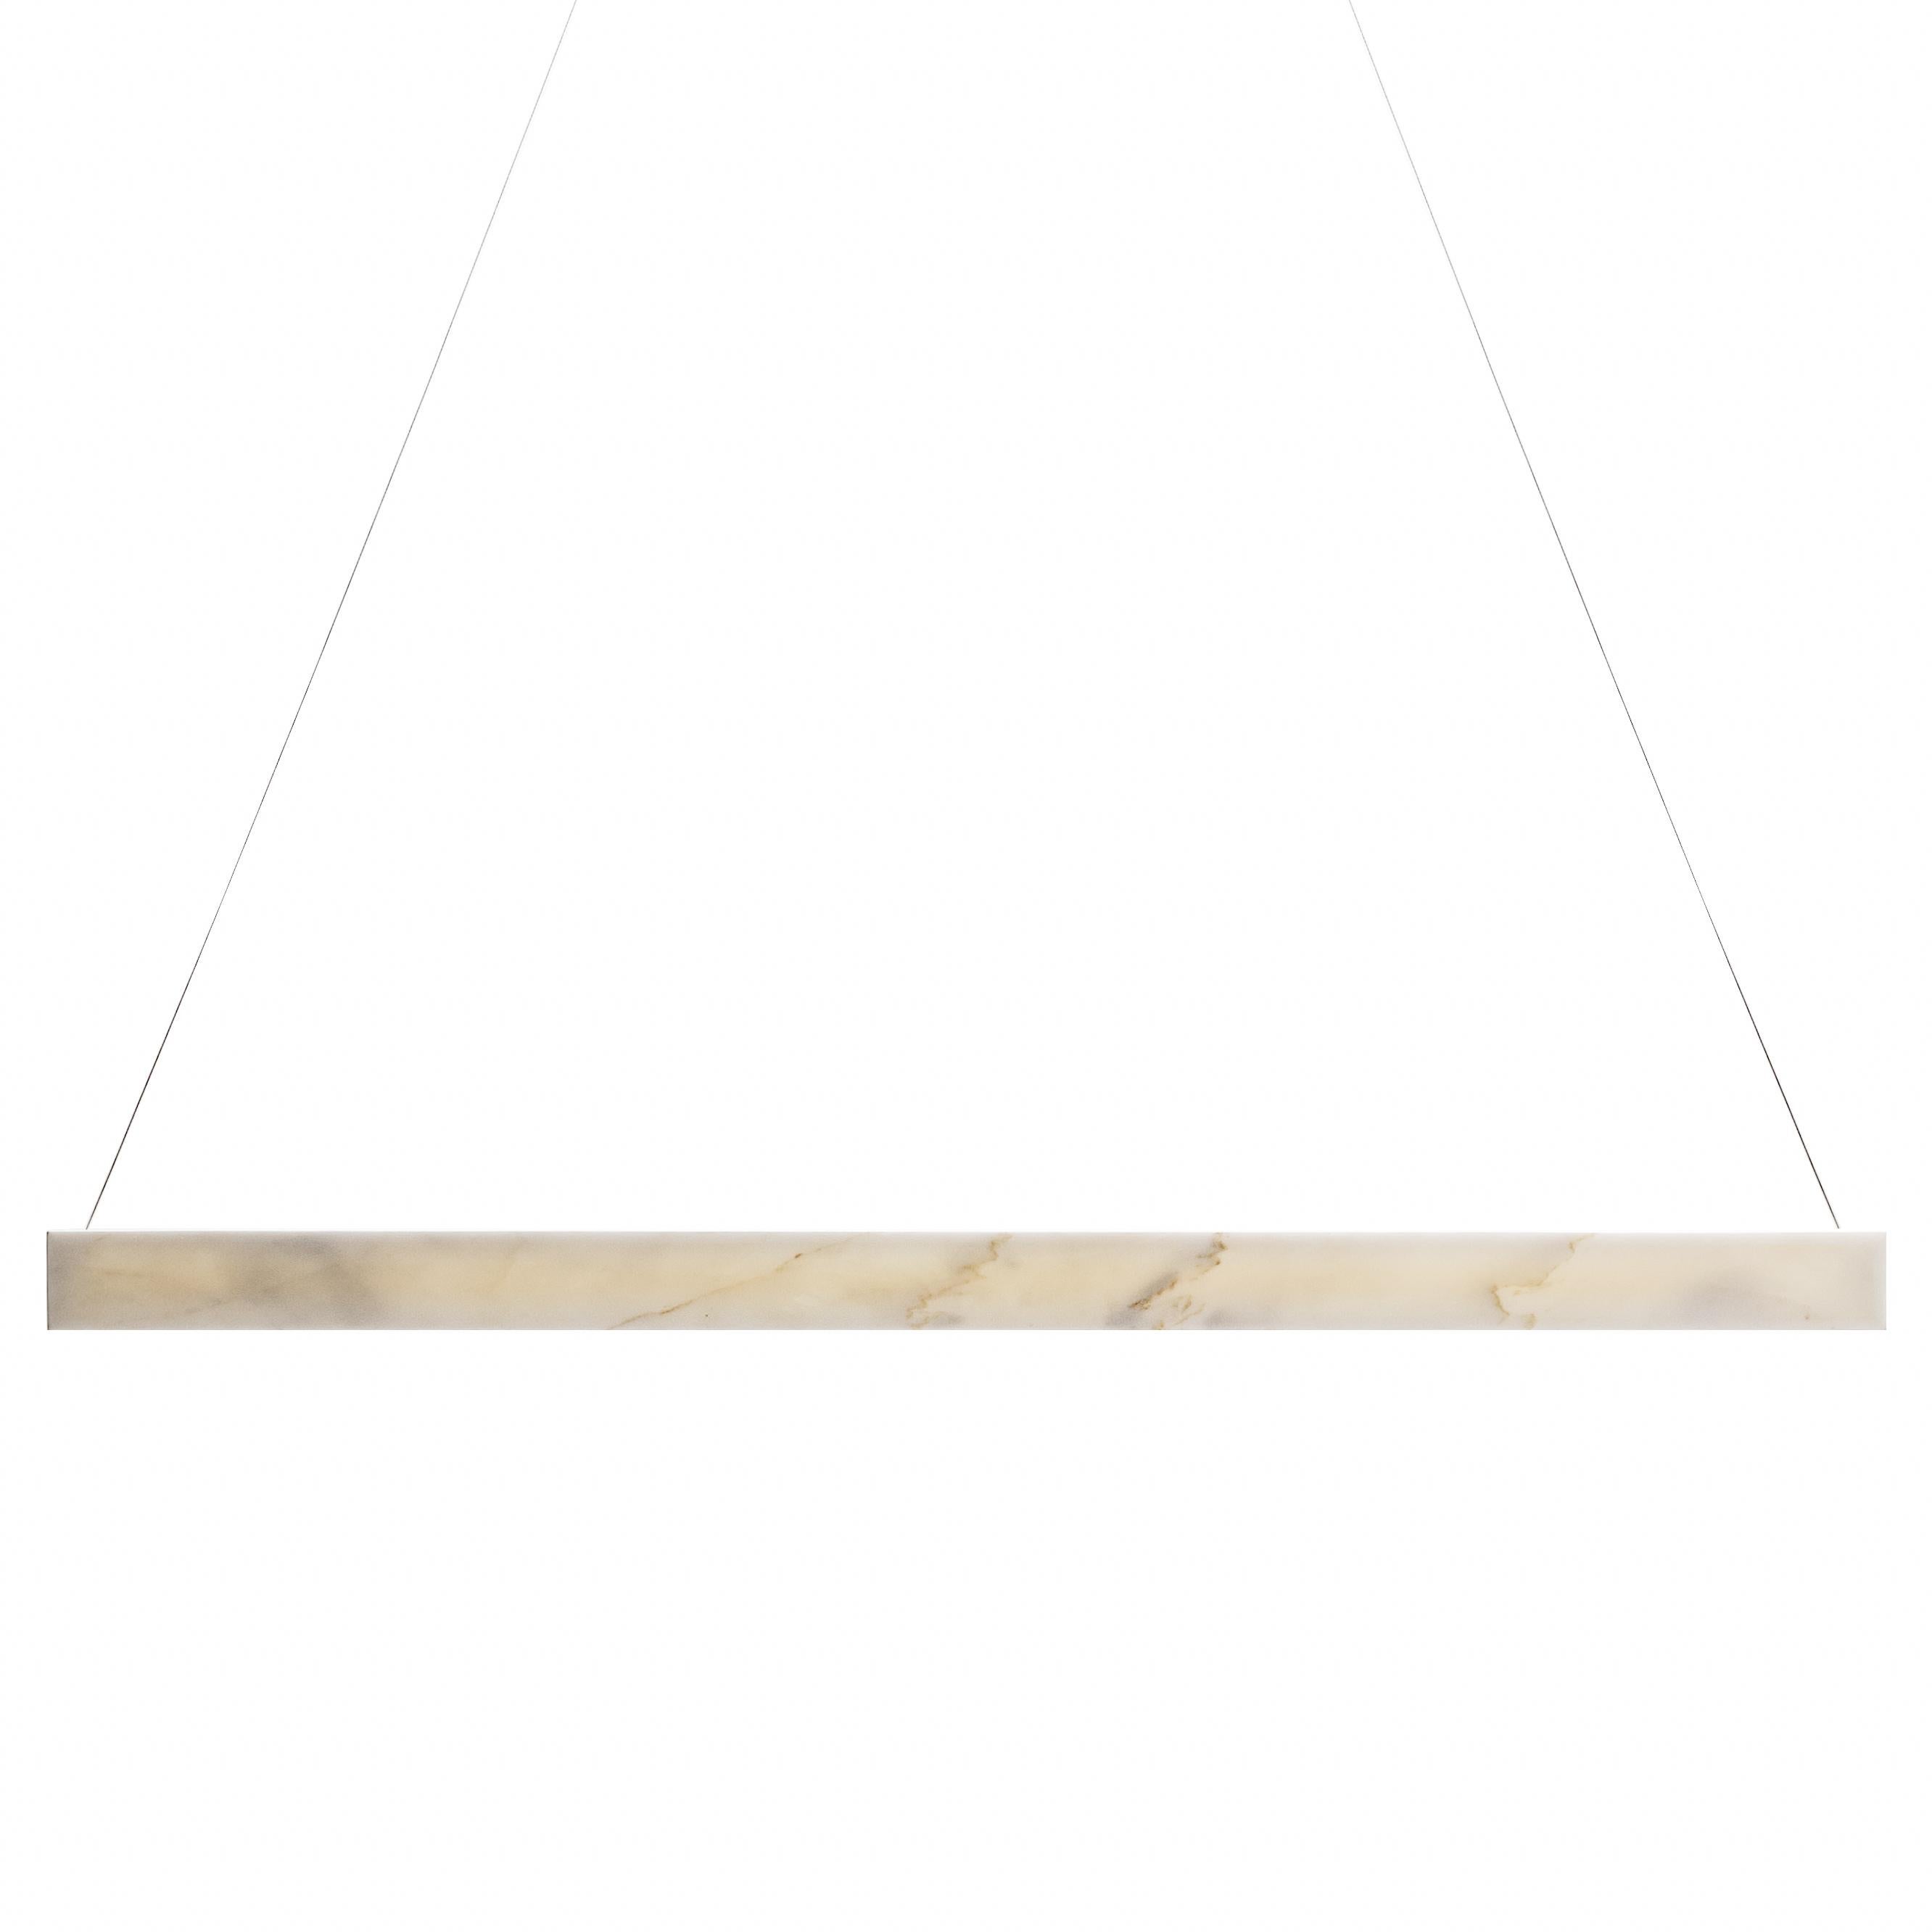 Modern Ray Marble Pendant Light by On.Entropy, in Seamless White Marble For Sale